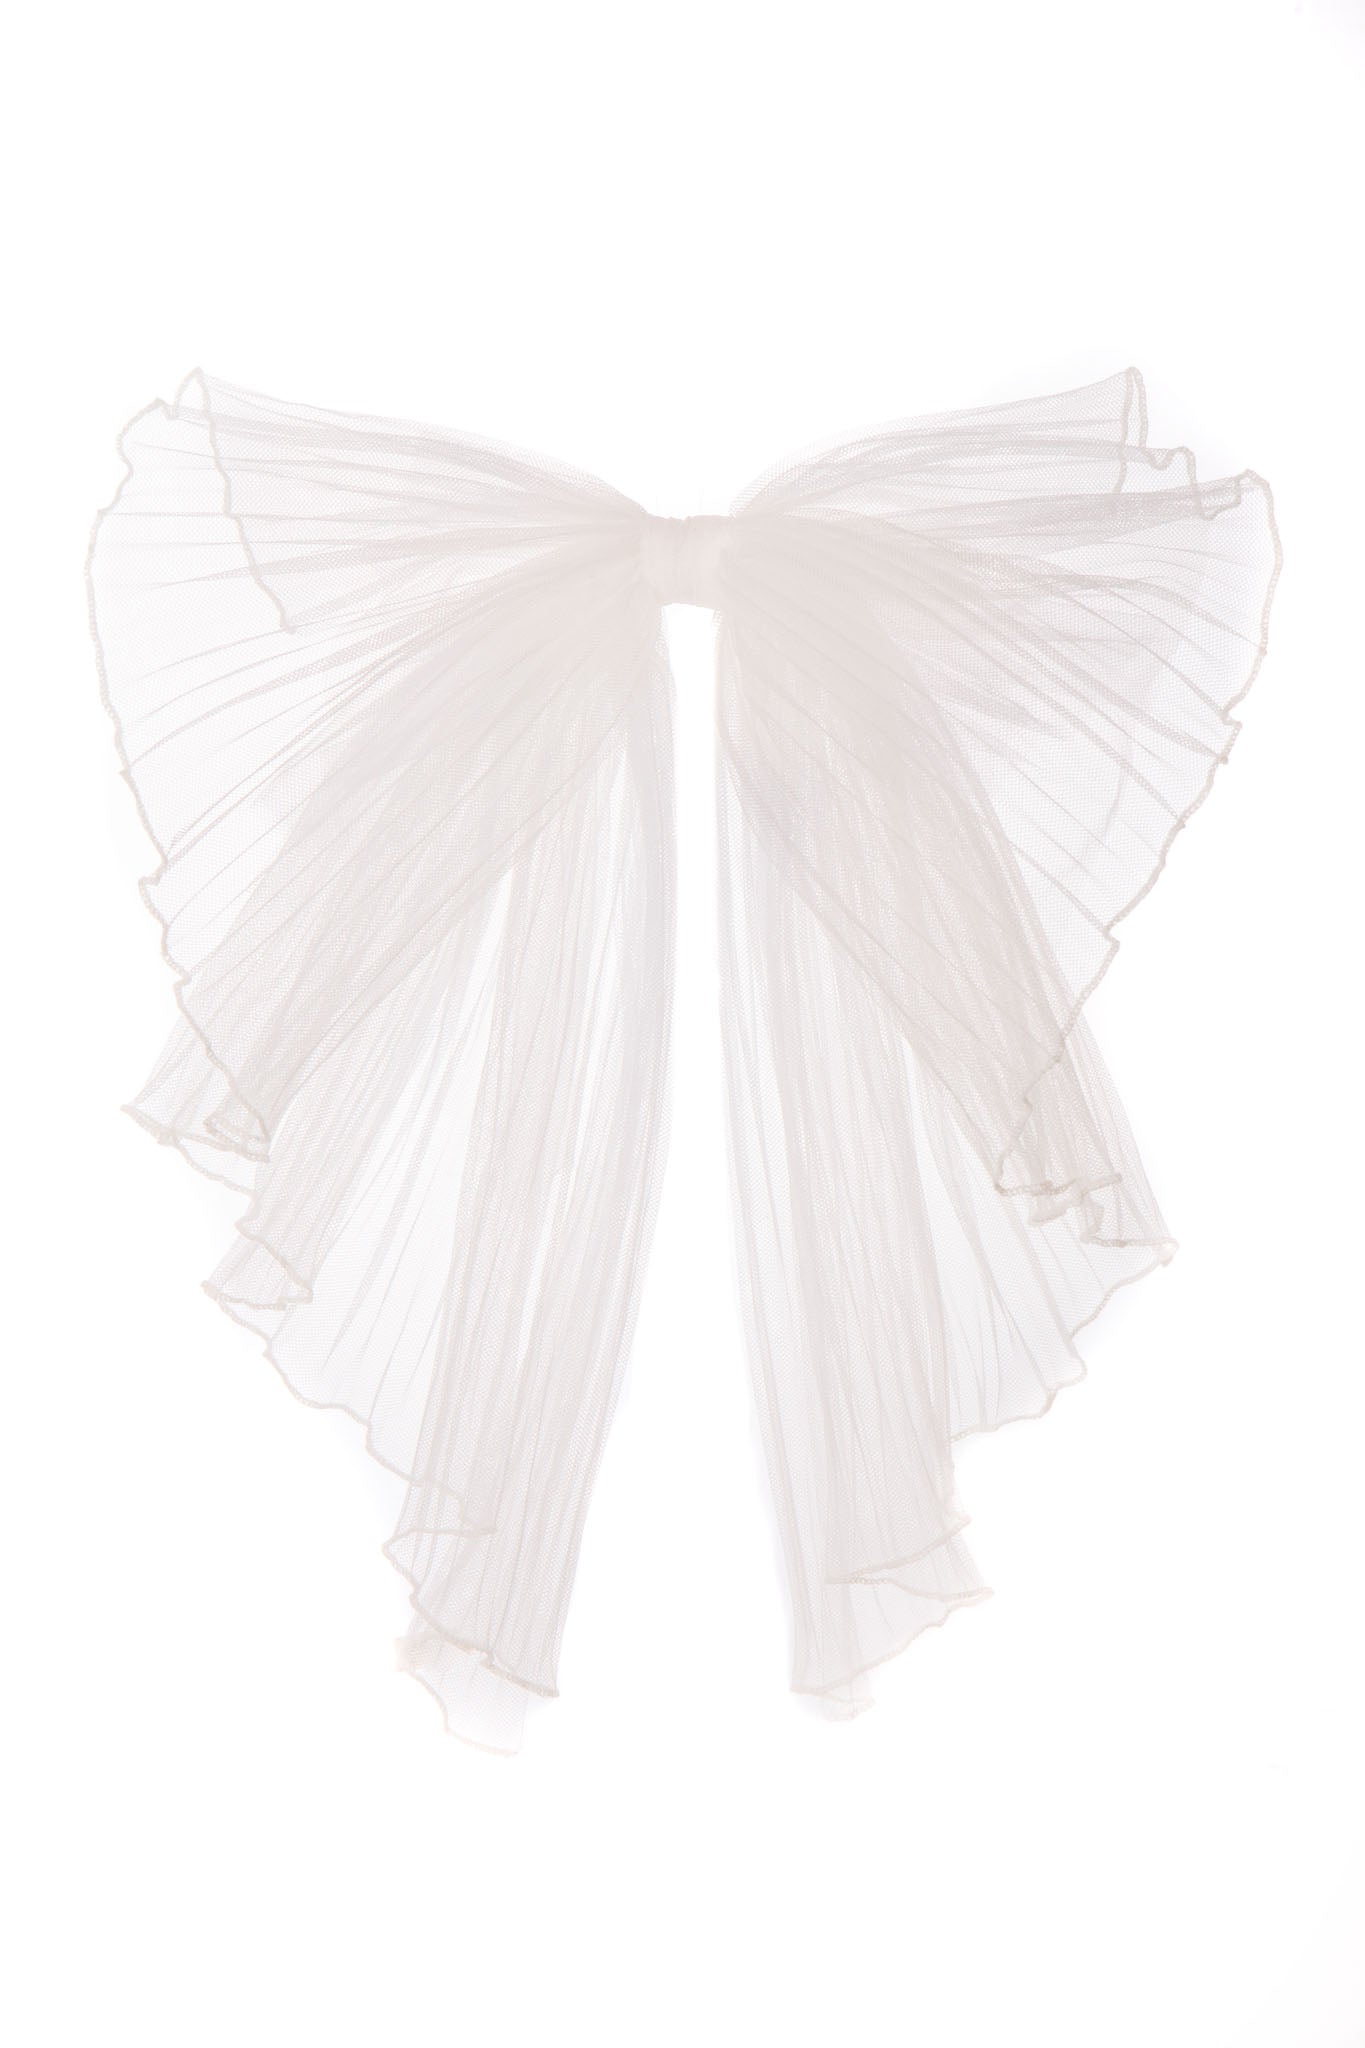 This Pleated bow adds a classic, effortless look to any hairstyle, style it in a sleek ponytail or minimalist bridal look